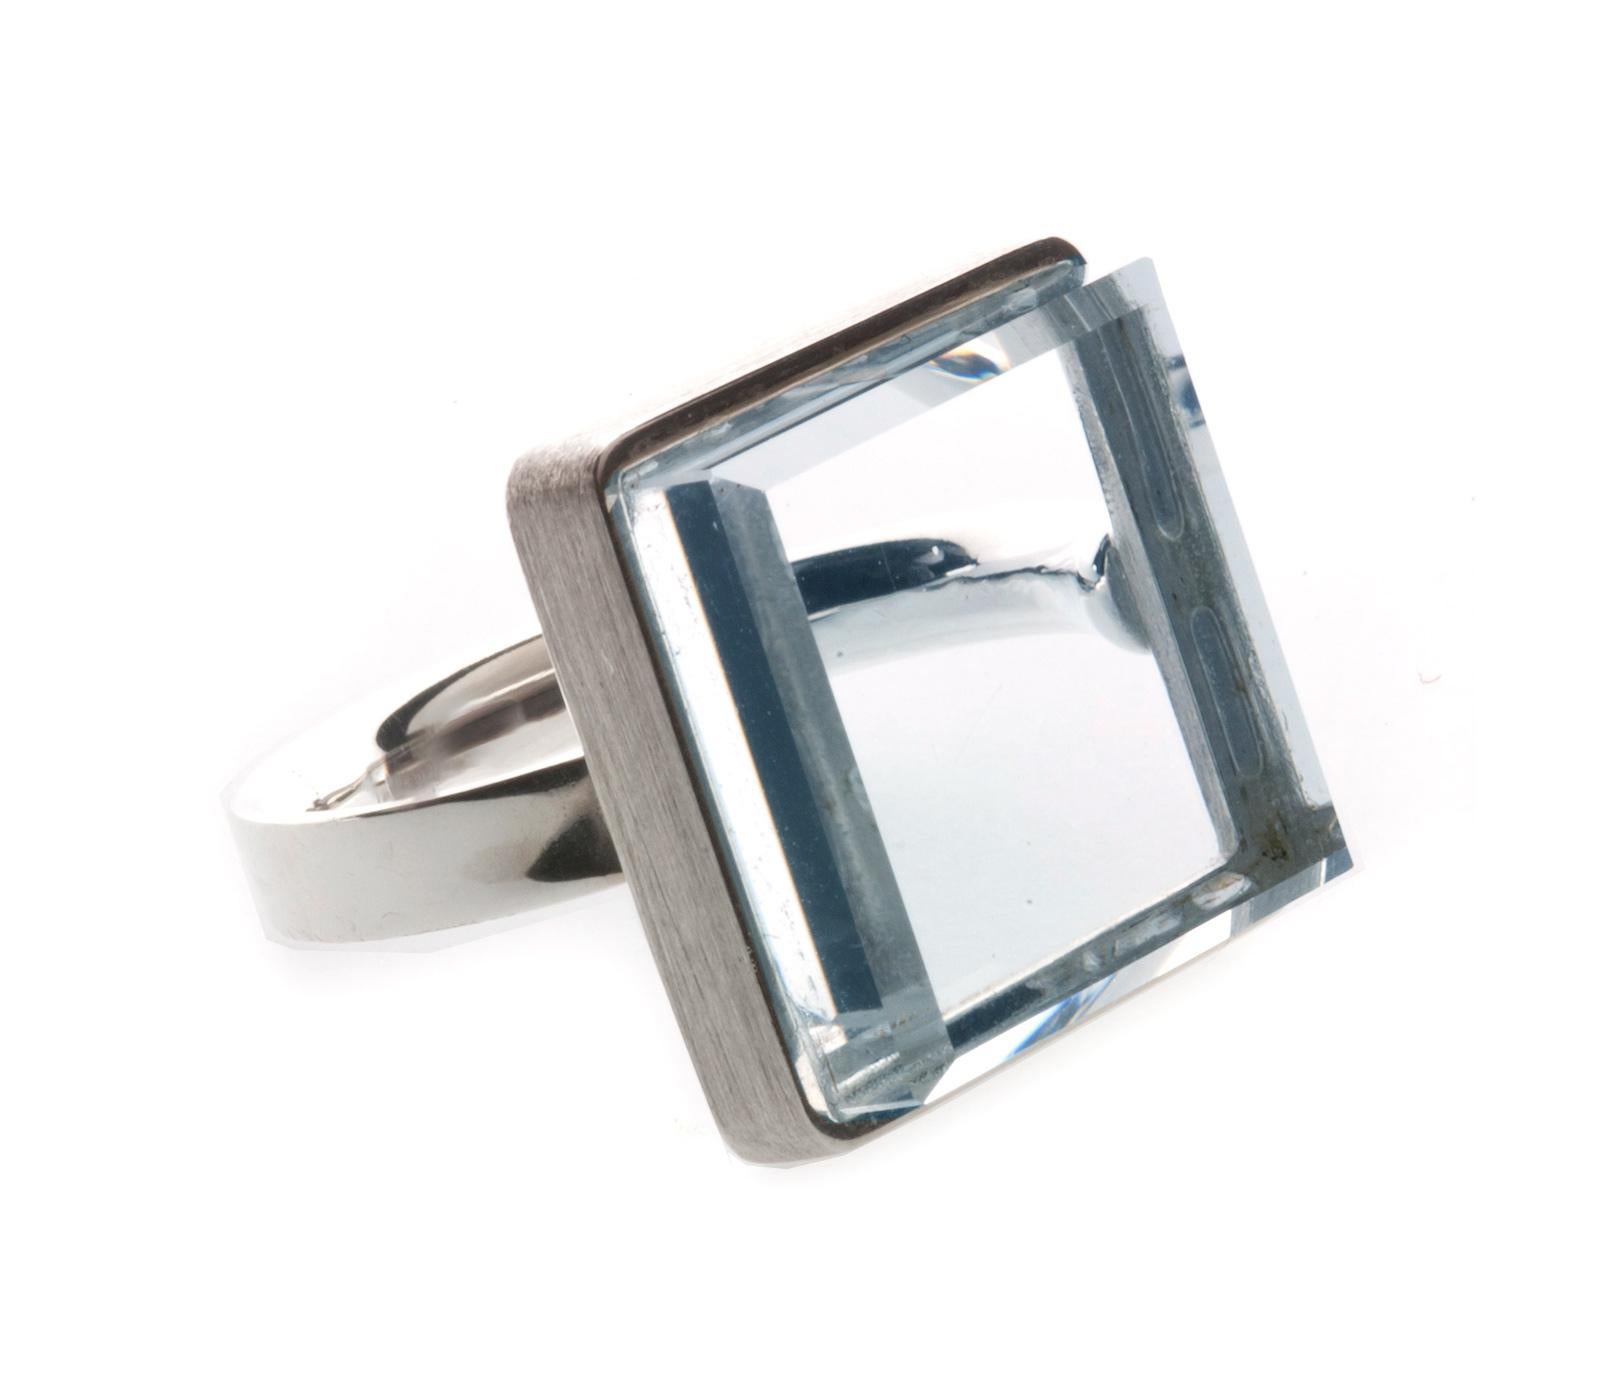 This contemporary jewellery ring features a 15x15x8 mm light blue quartz set in 14 karat yellow gold. It has been featured in Harper's Bazaar and Vogue UA publications.

The ring exudes an art deco spirit and is suitable for both women and men. It